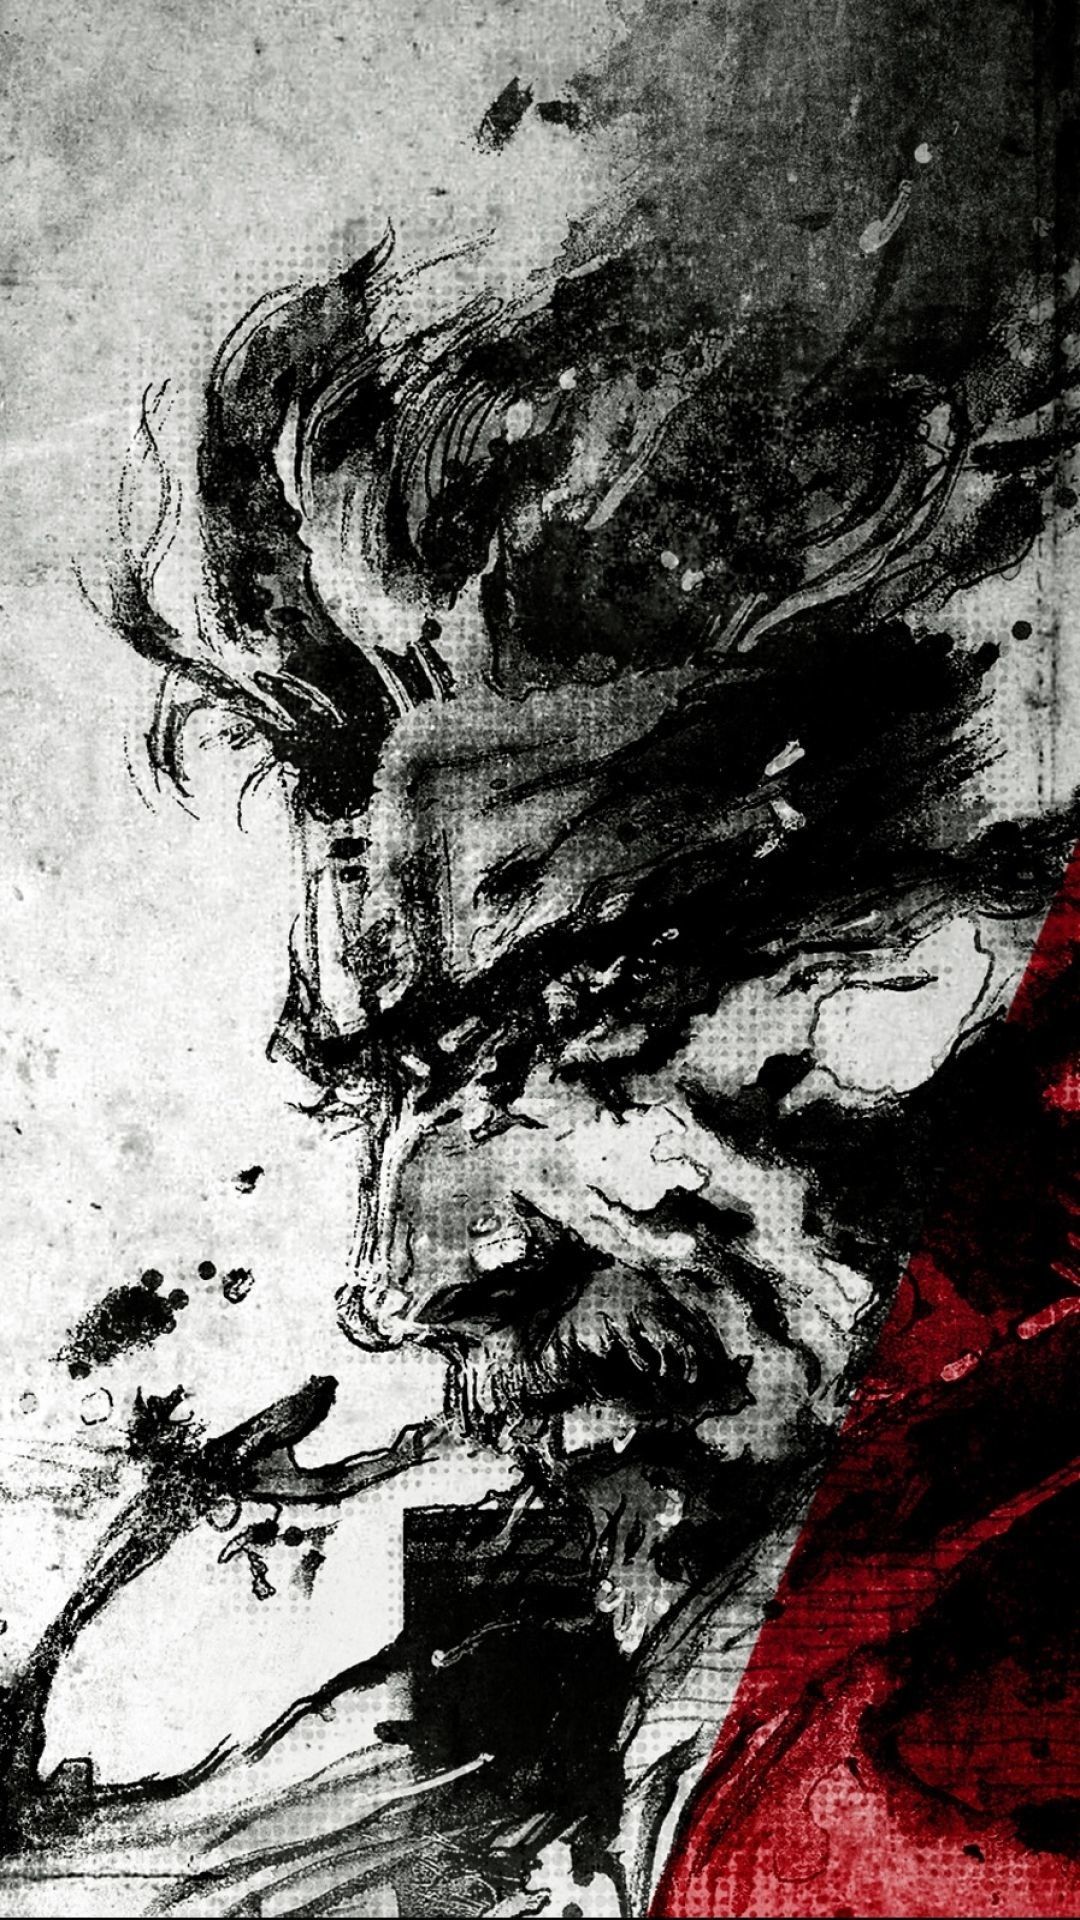 Mgs5 iPhone Wallpaper on Wallpaperbig